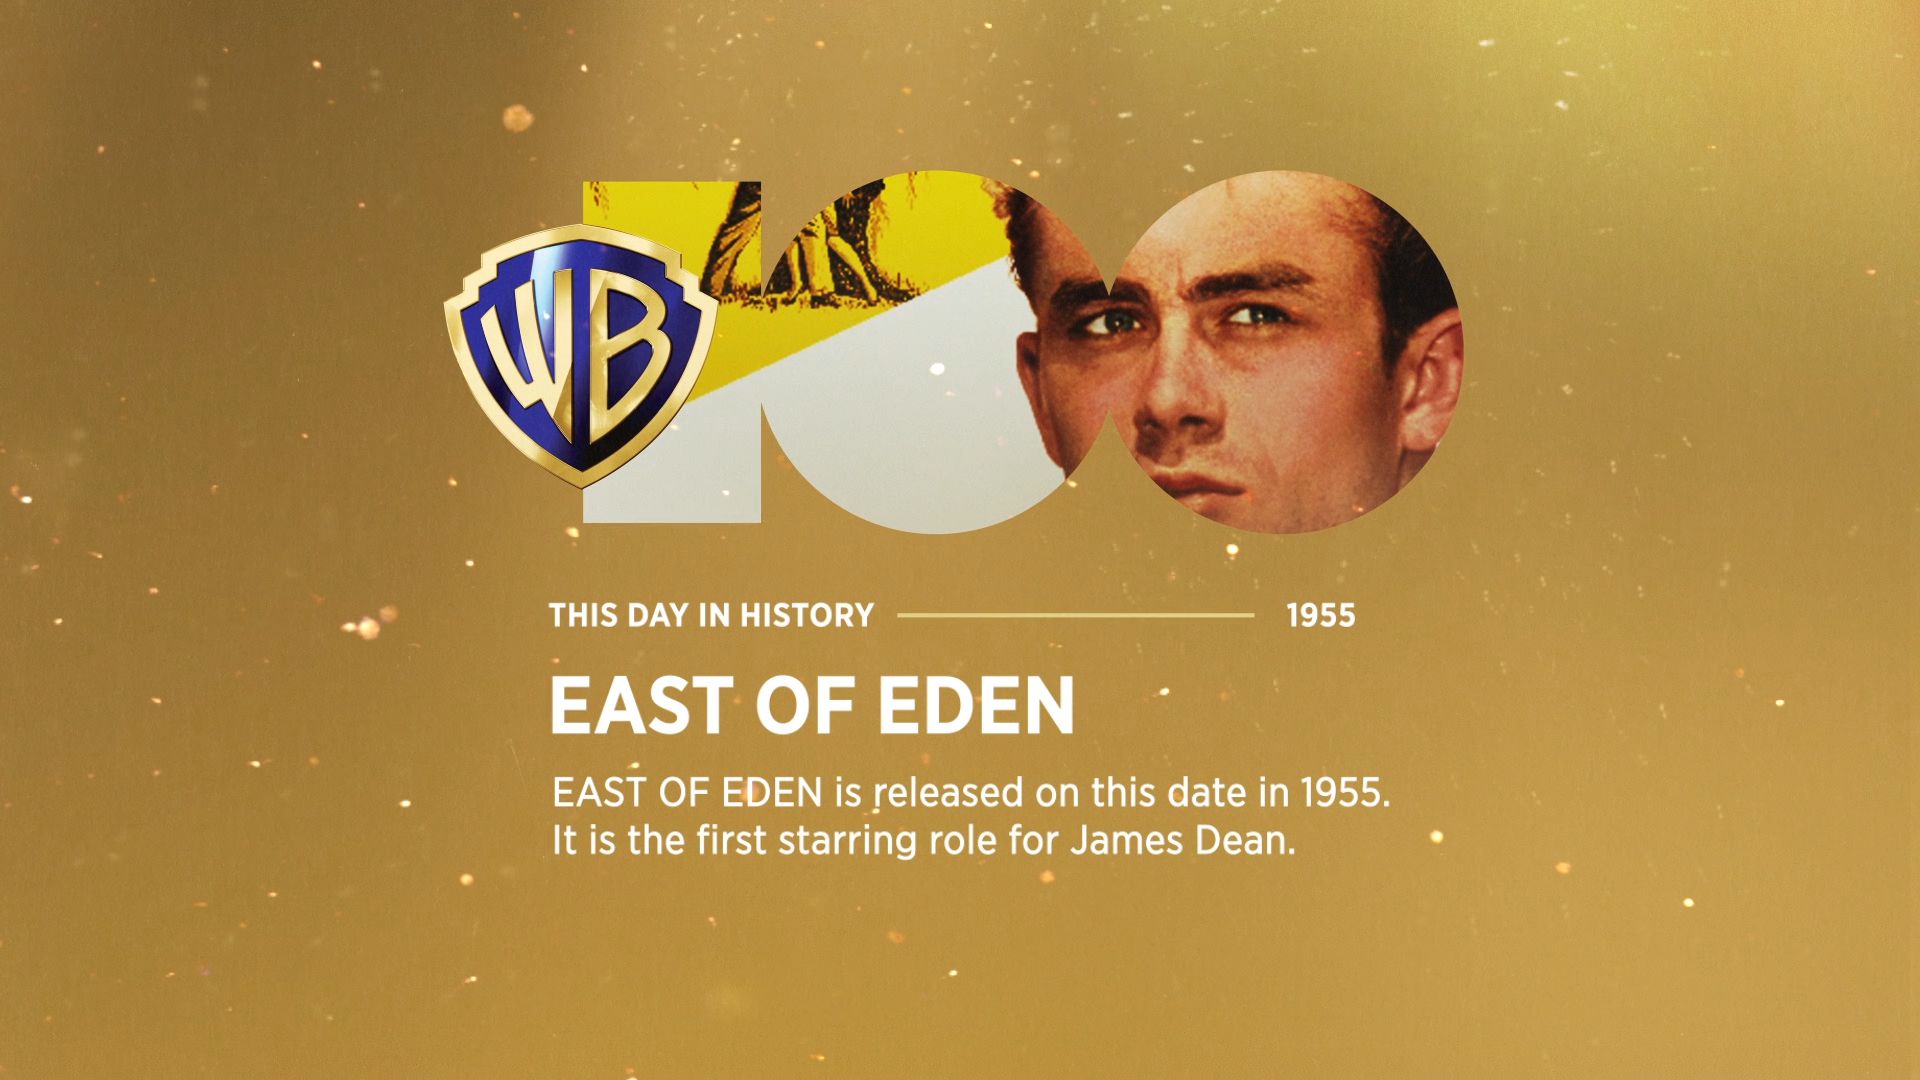 WB100: This Day in History: 'East of Eden'